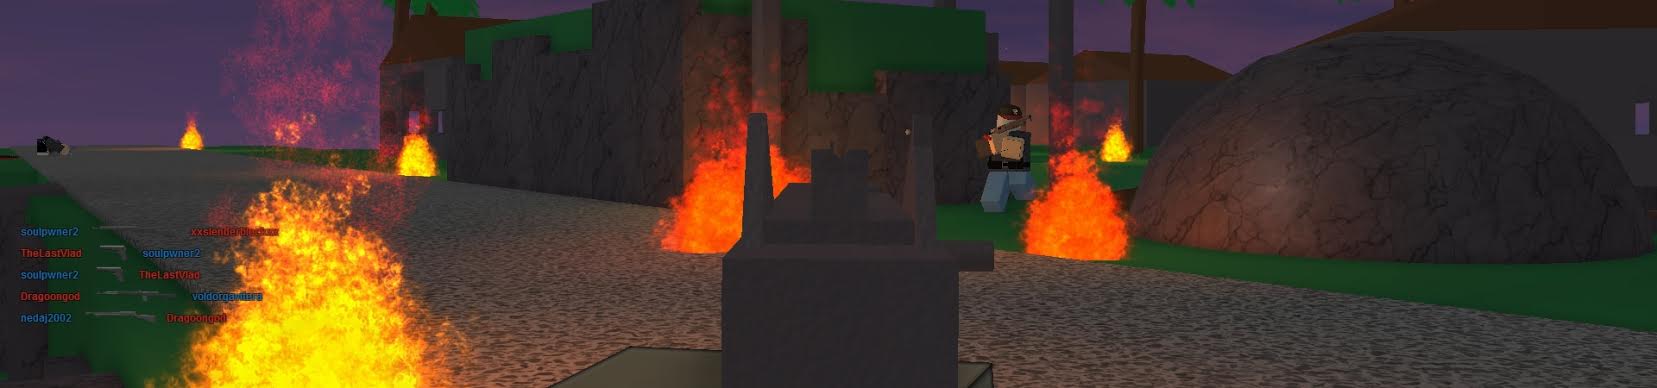 Transforming The Look Of Roblox With New Particle Effects Roblox